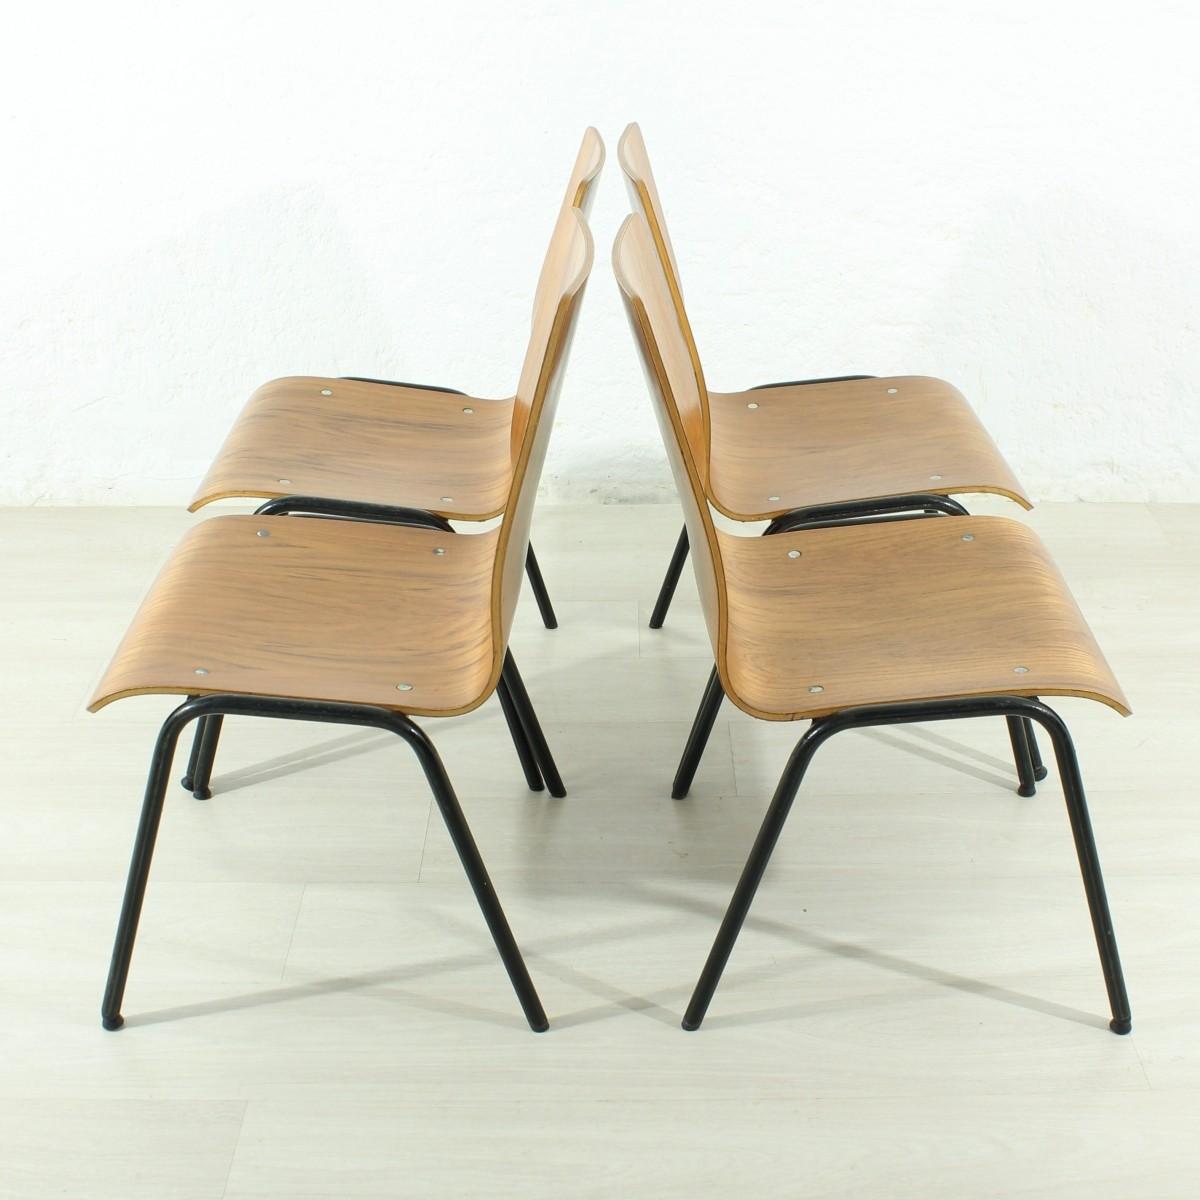 Mid-20th Century Set of 4 1960s Teak Chairs For Sale